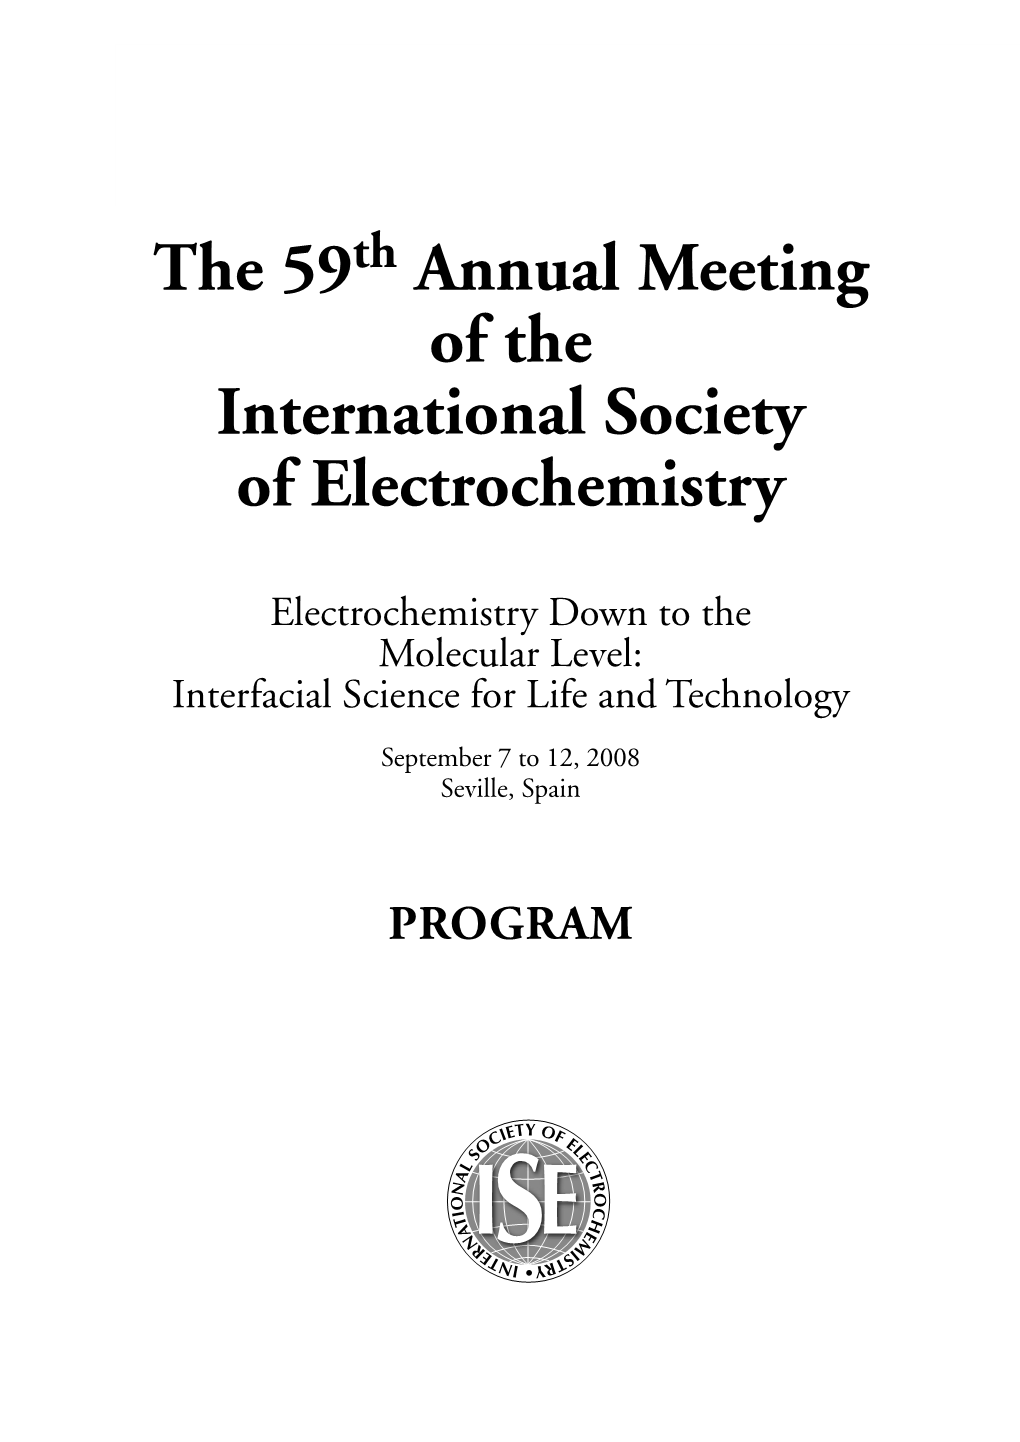 Annual Meeting of the International Society of Electrochemistry I